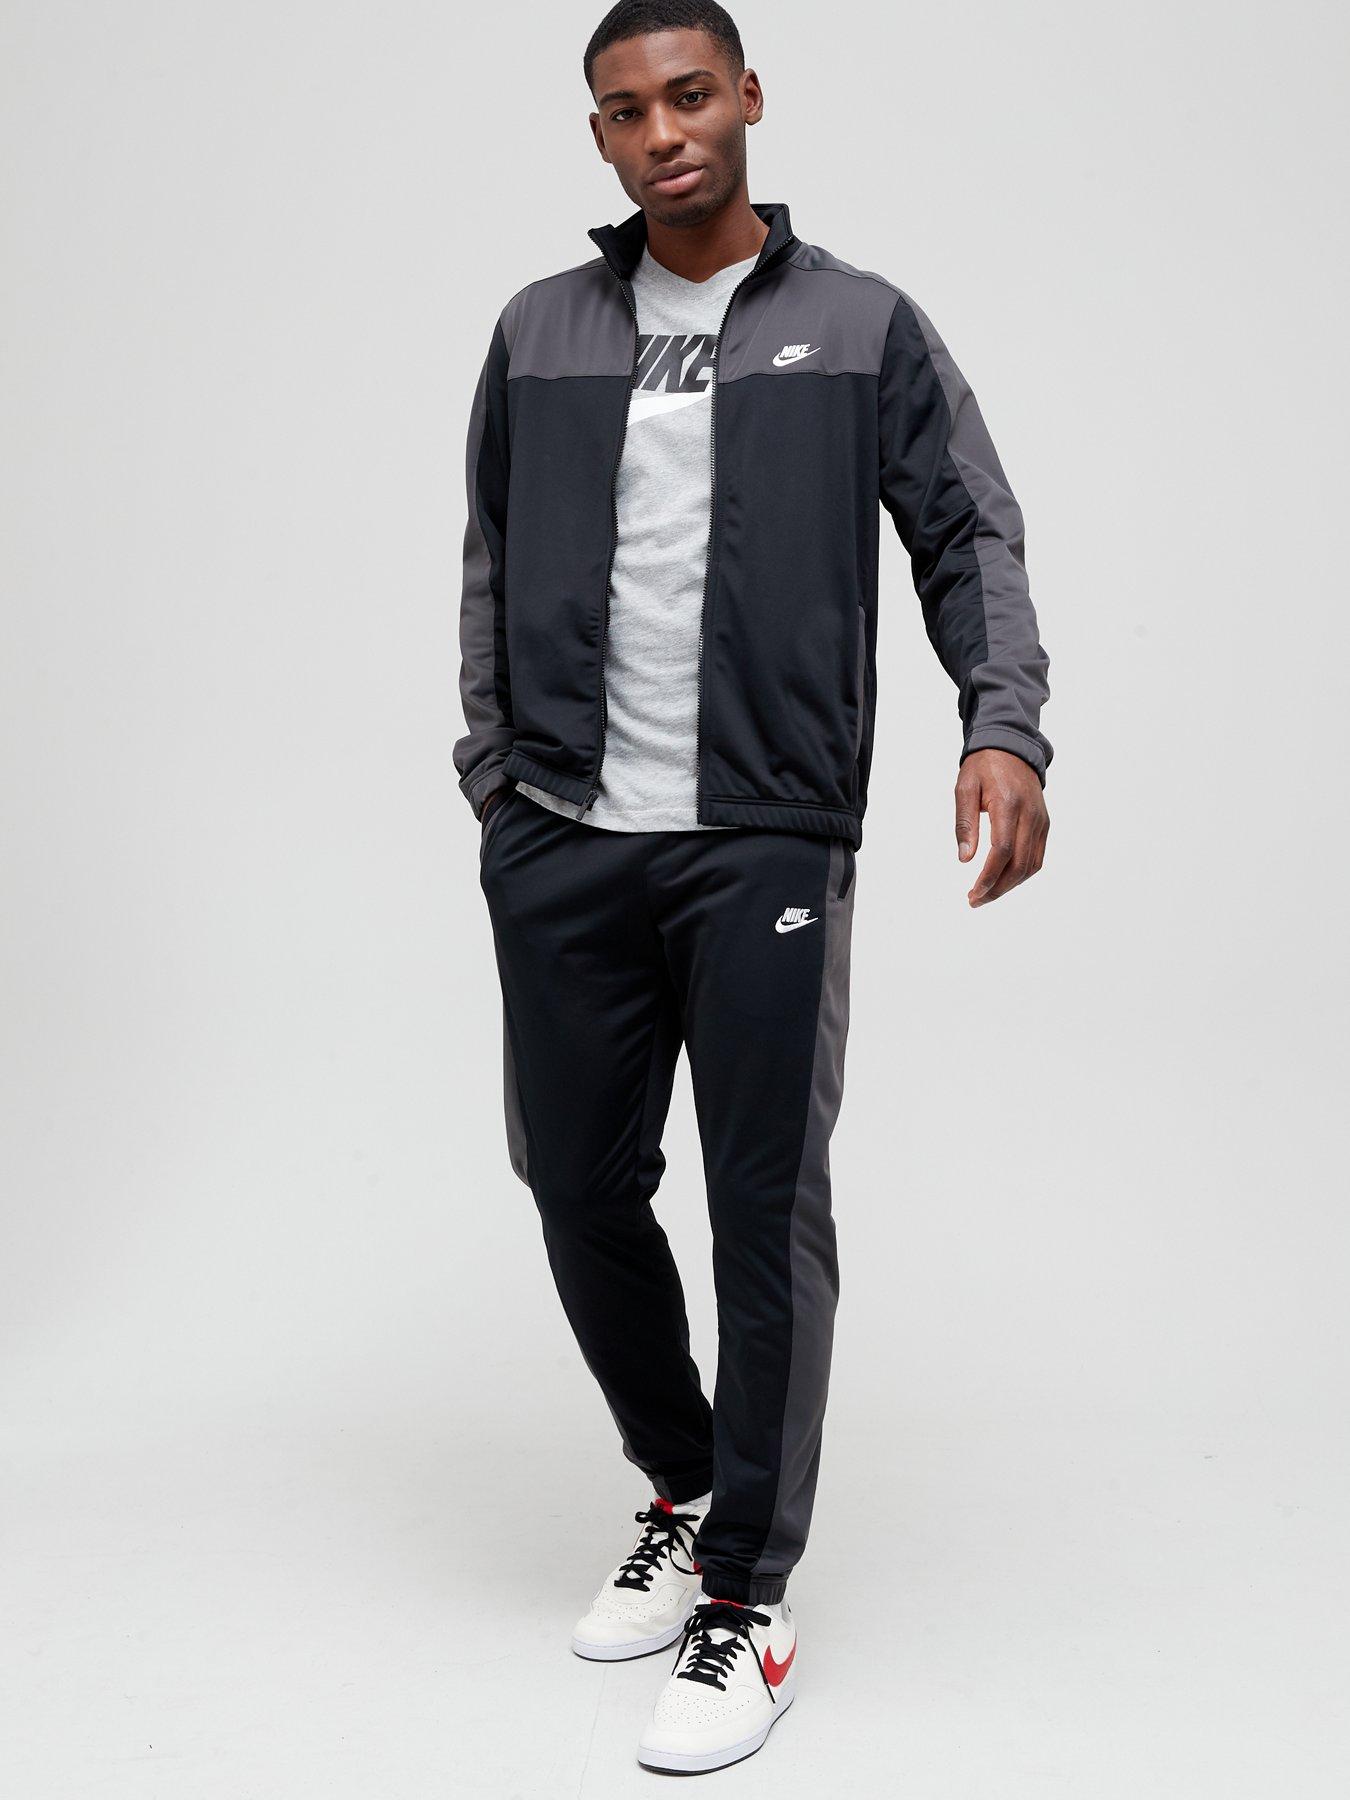 Mens Nike Clothing | Nike Clothes for Men | Very.co.uk